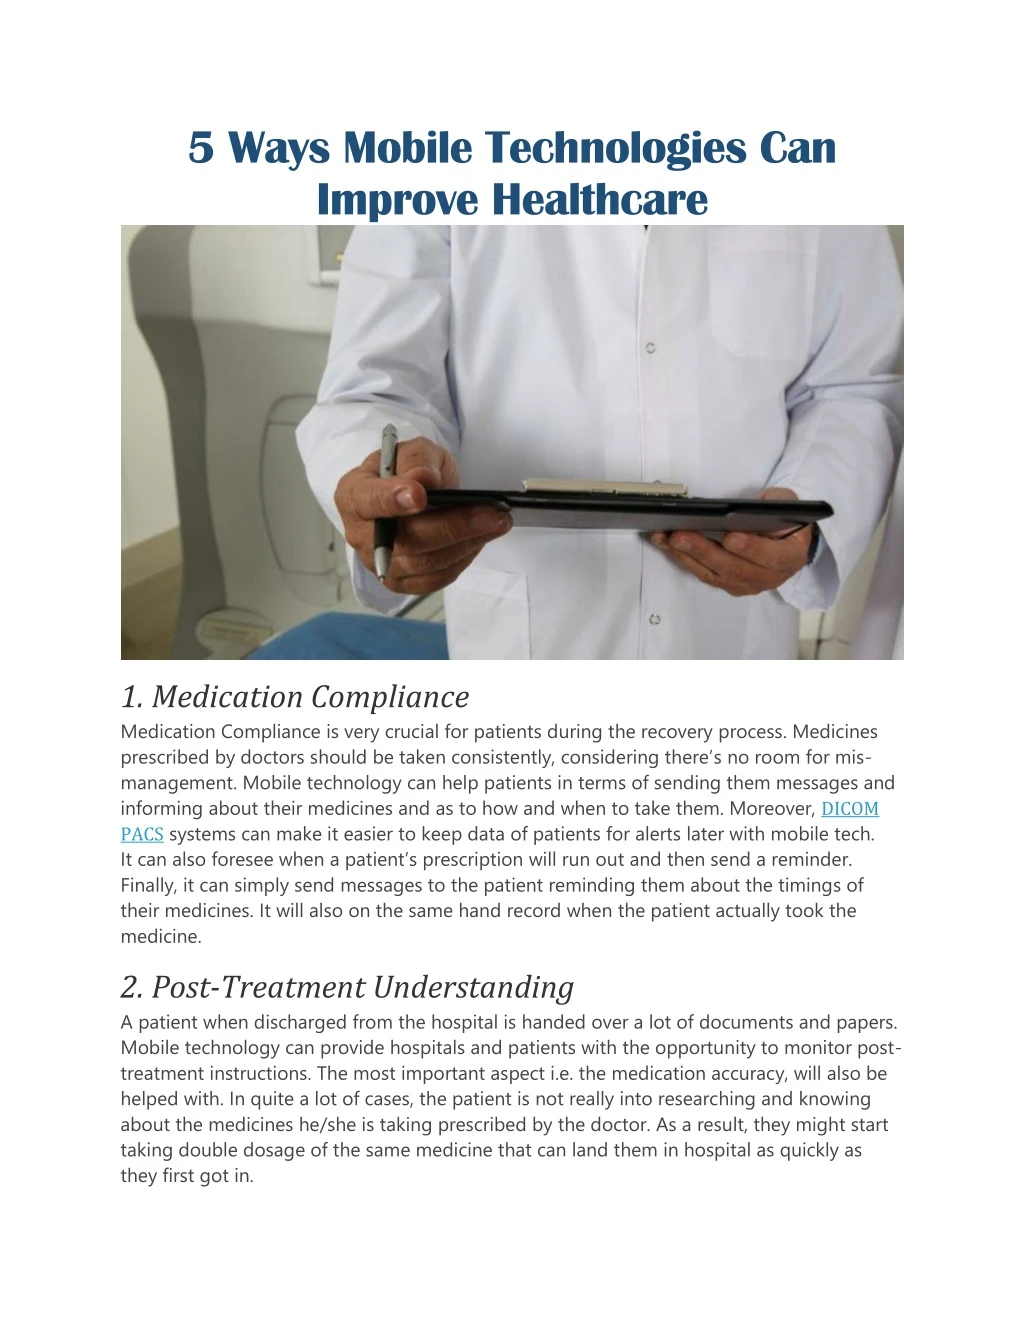 5 ways mobile technologies can improve healthcare